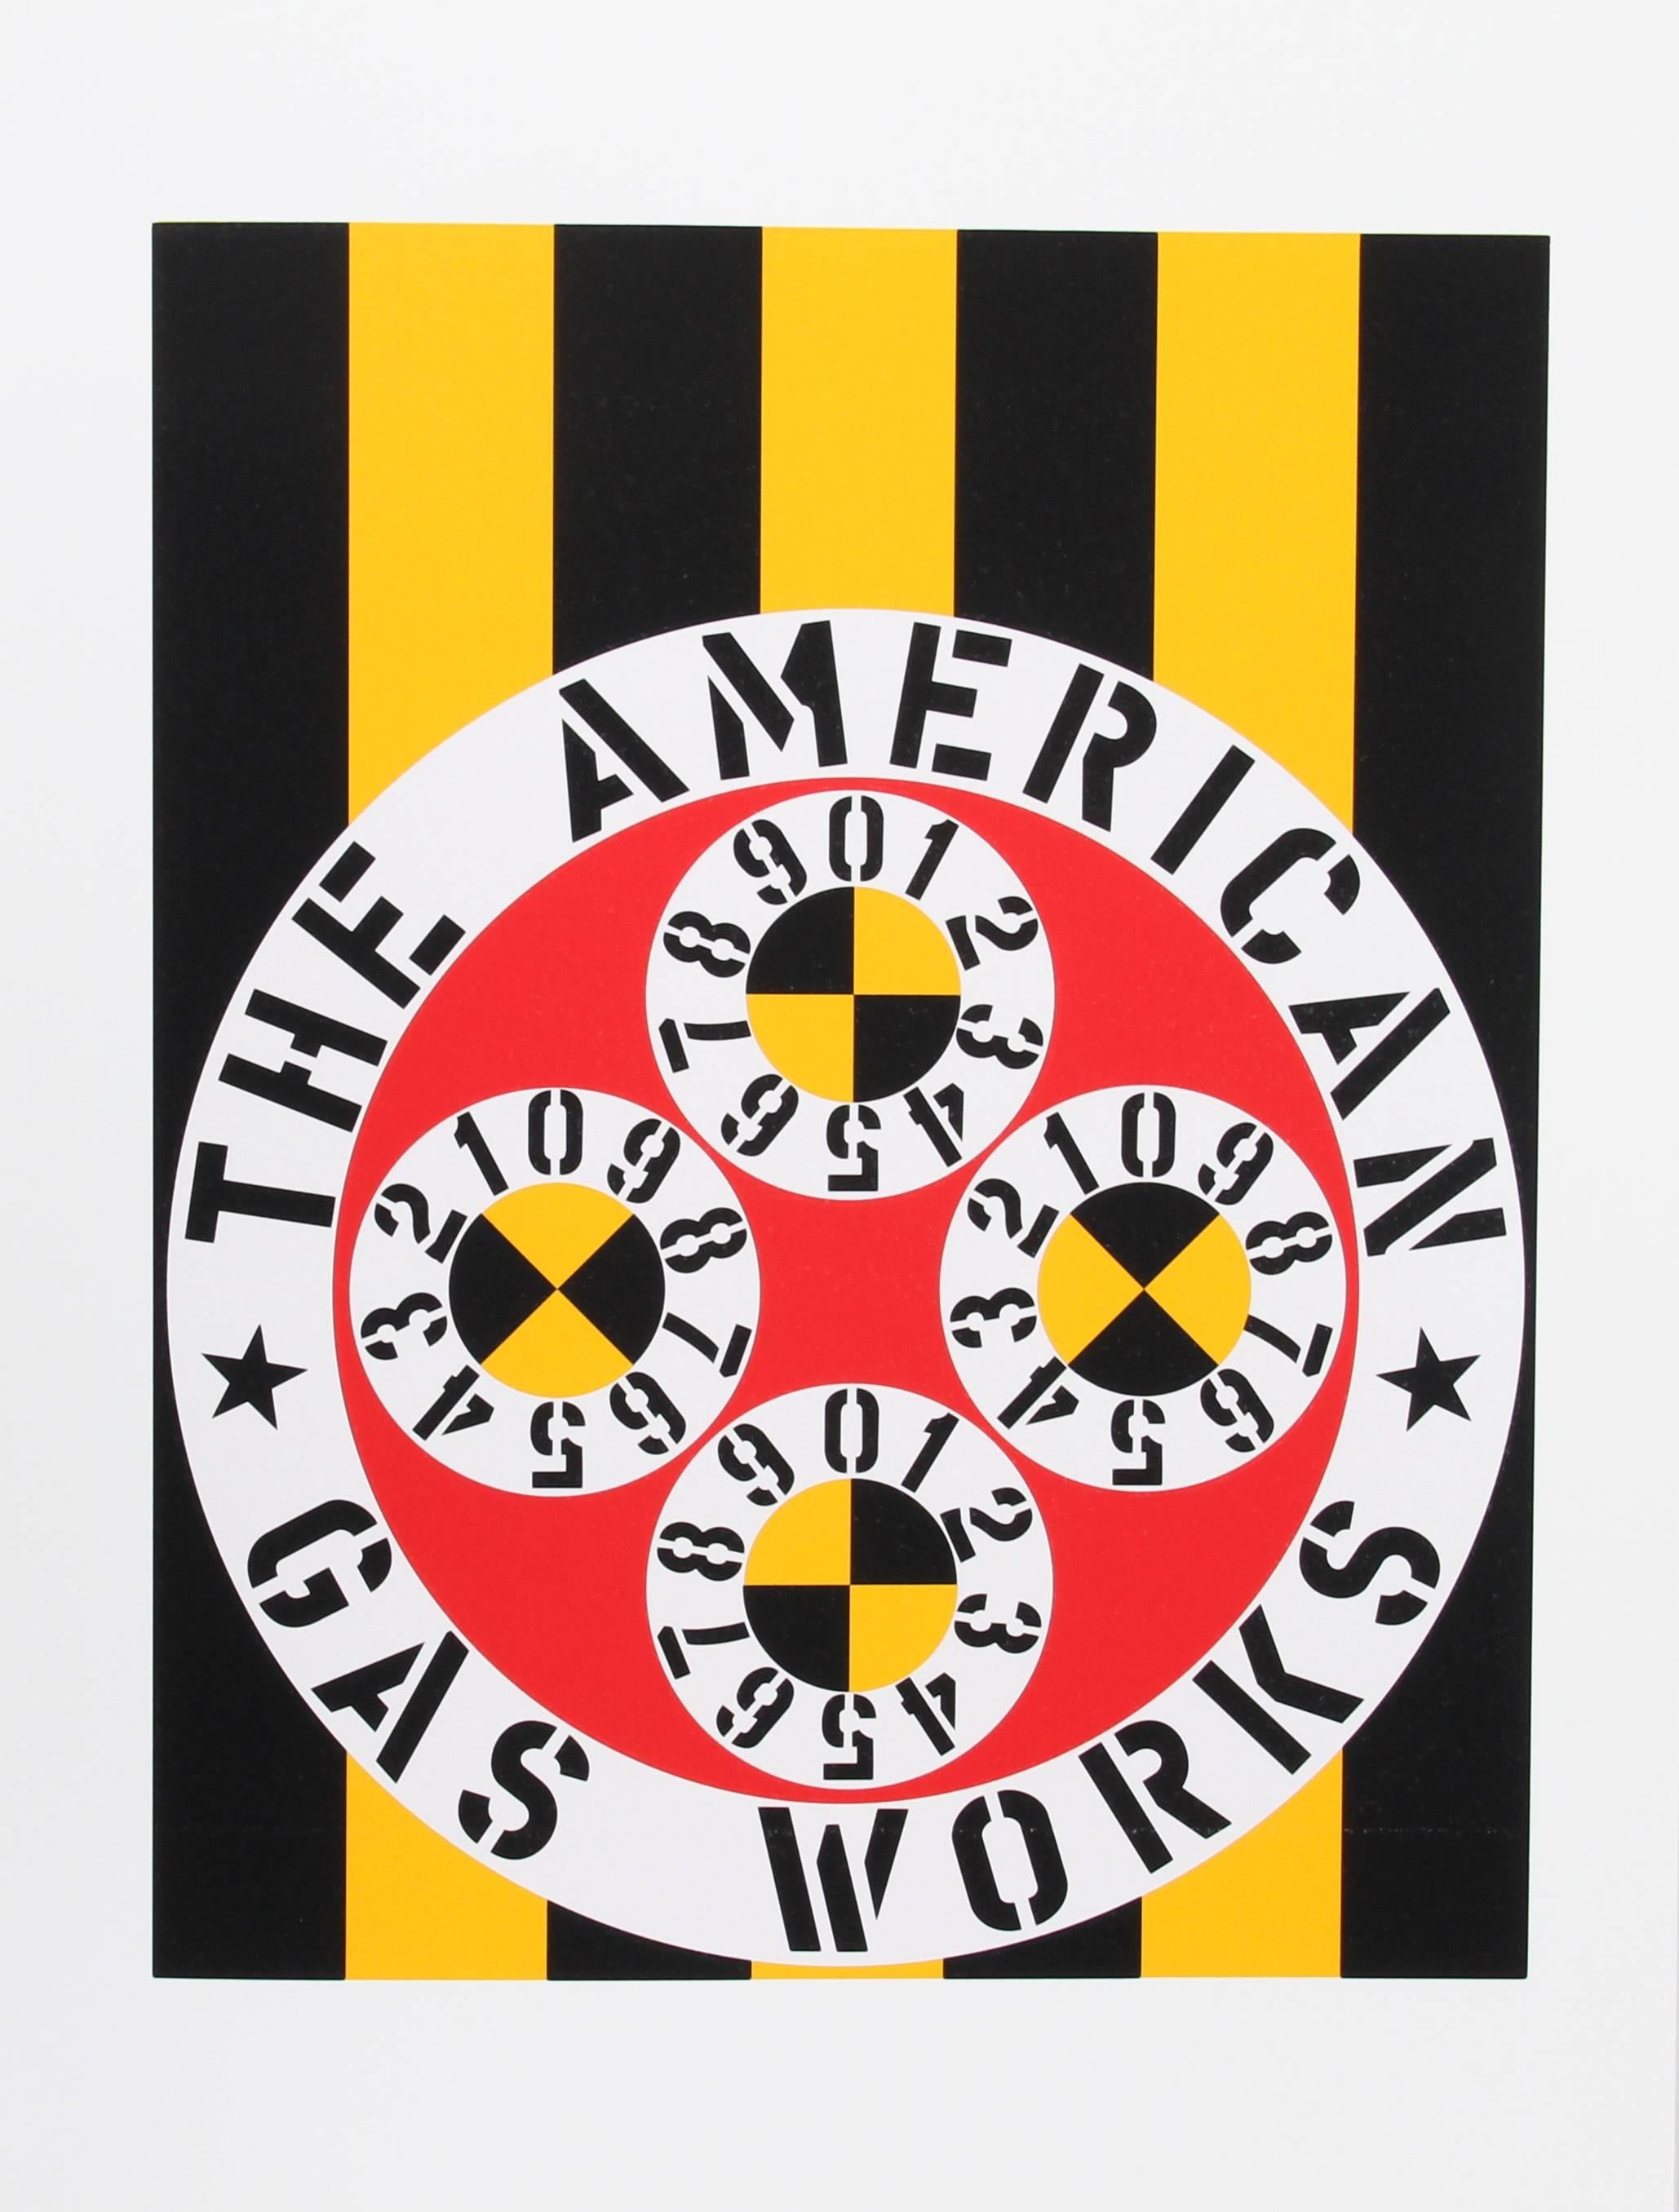 "The American Gas Works", from the American Dream Portfolio by Robert Indiana